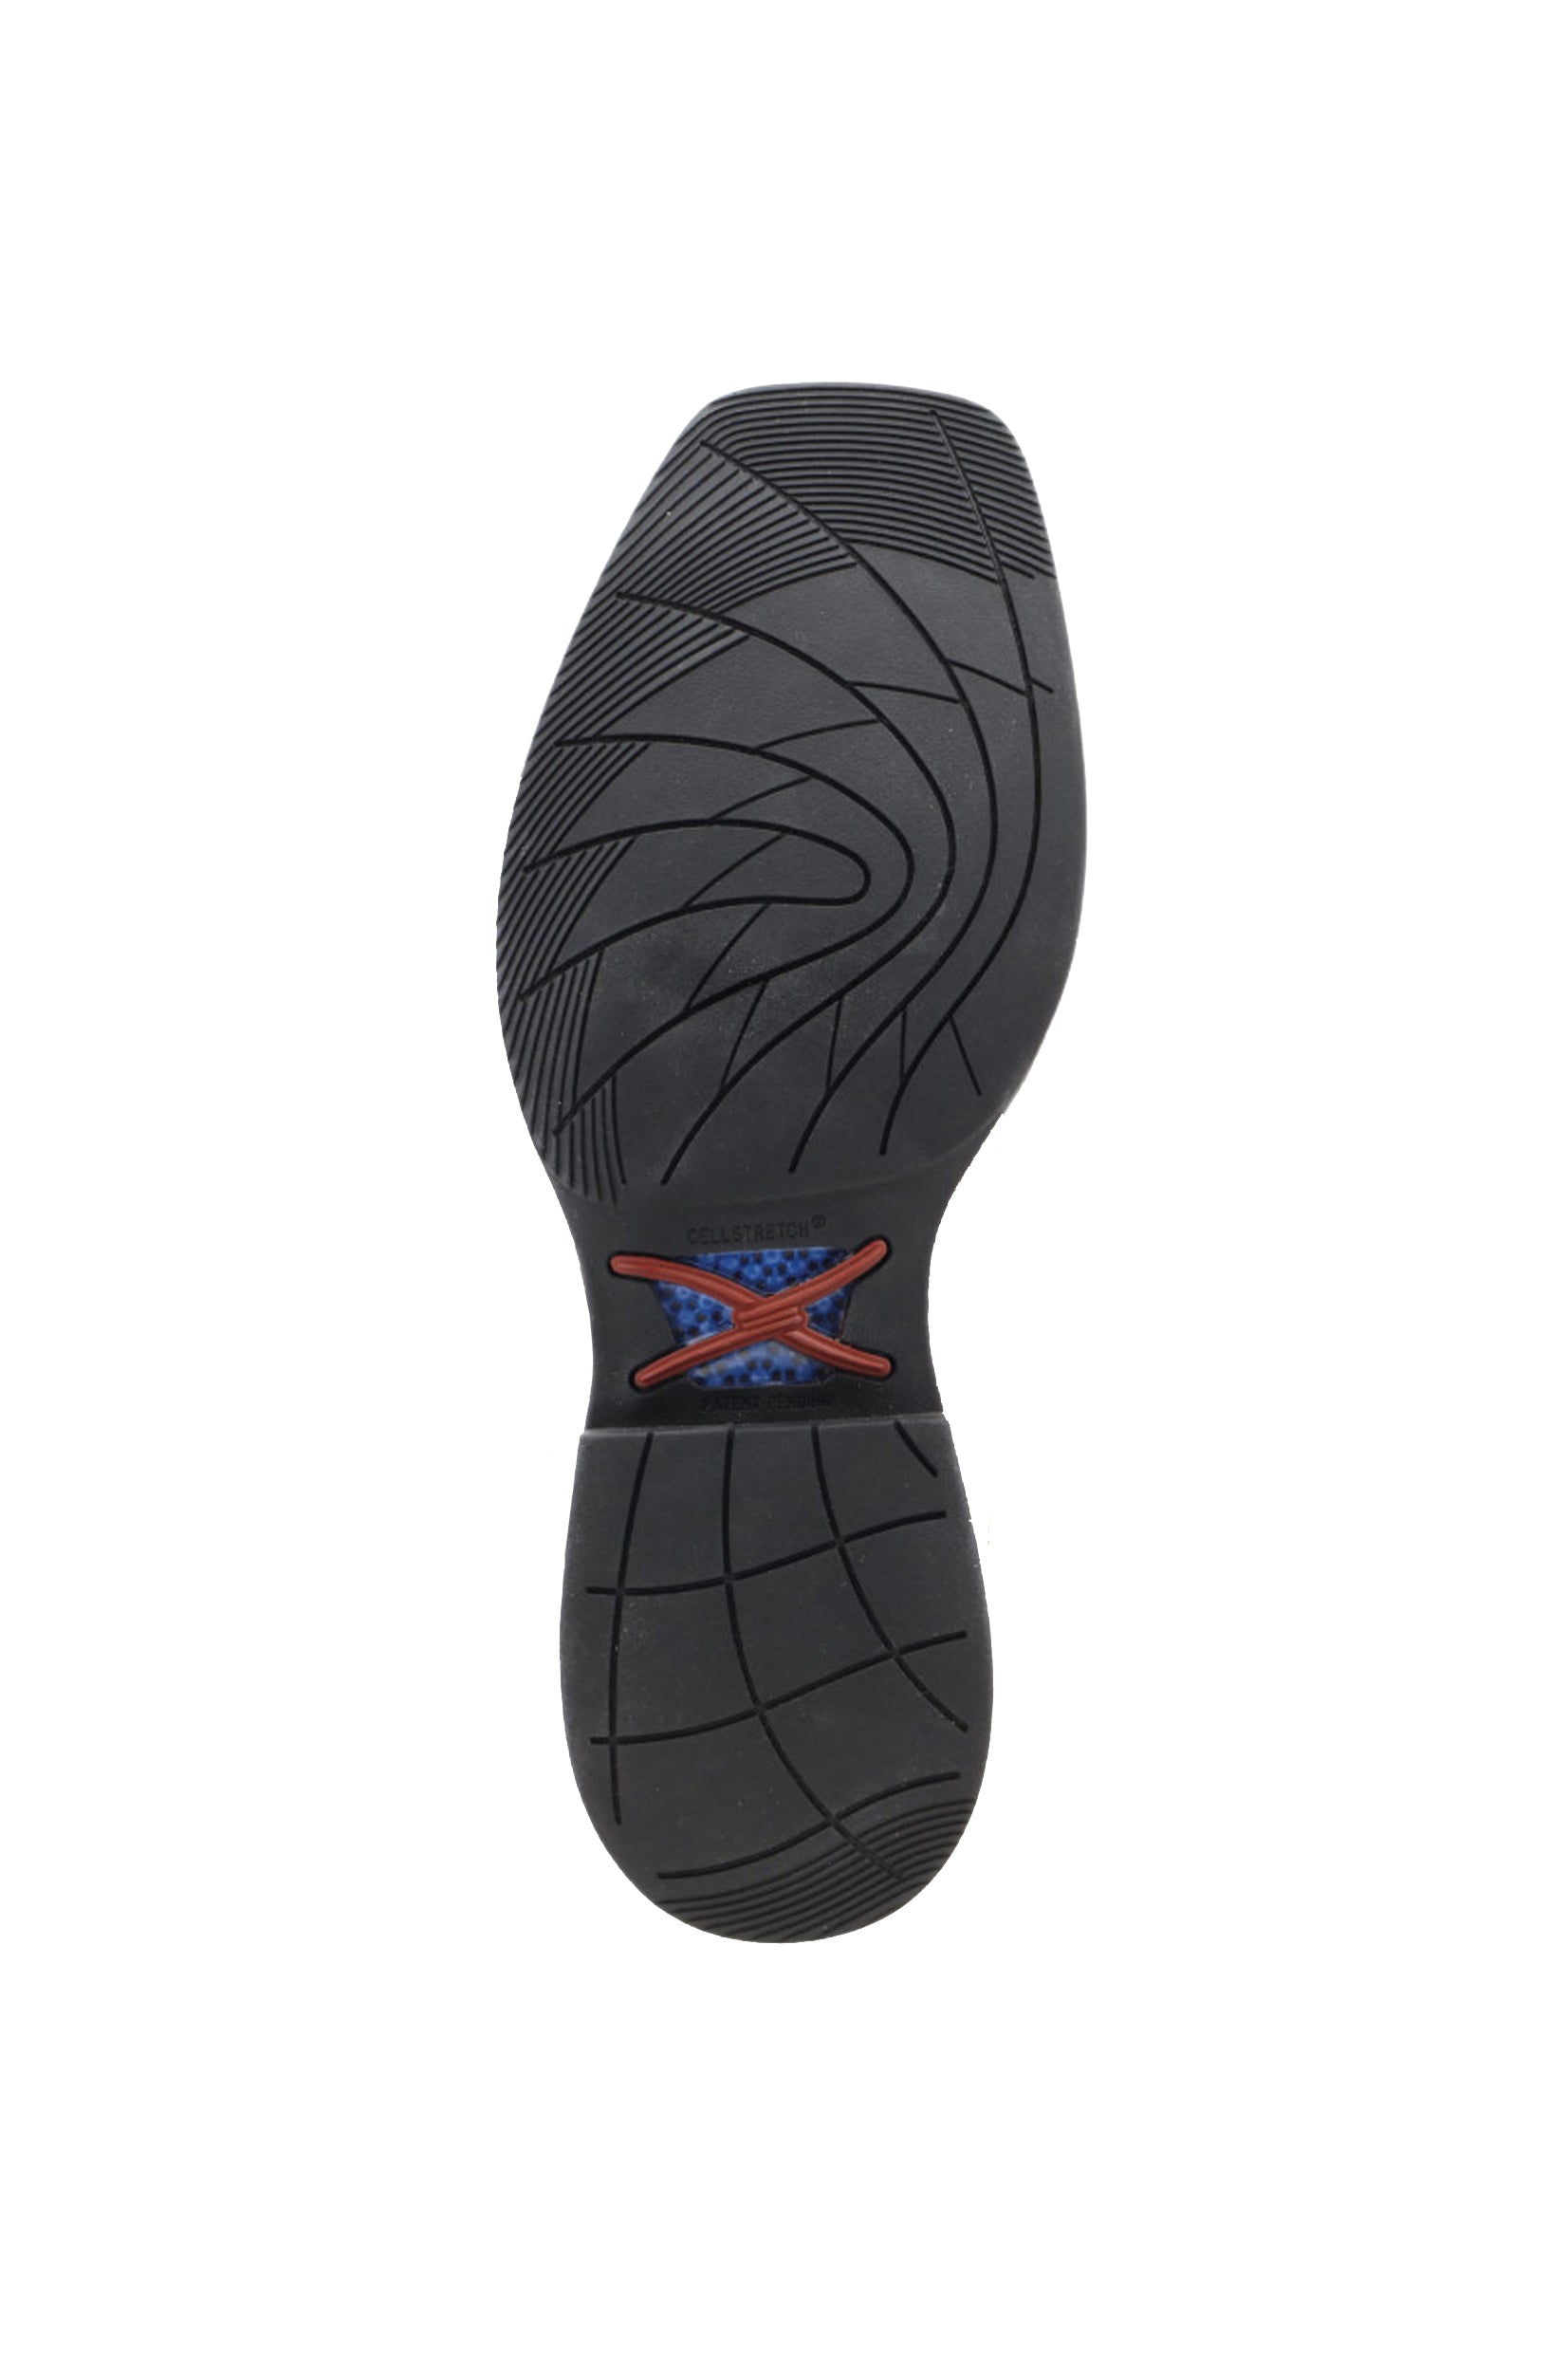 Twisted X Mens 12 Tech X1 Boot